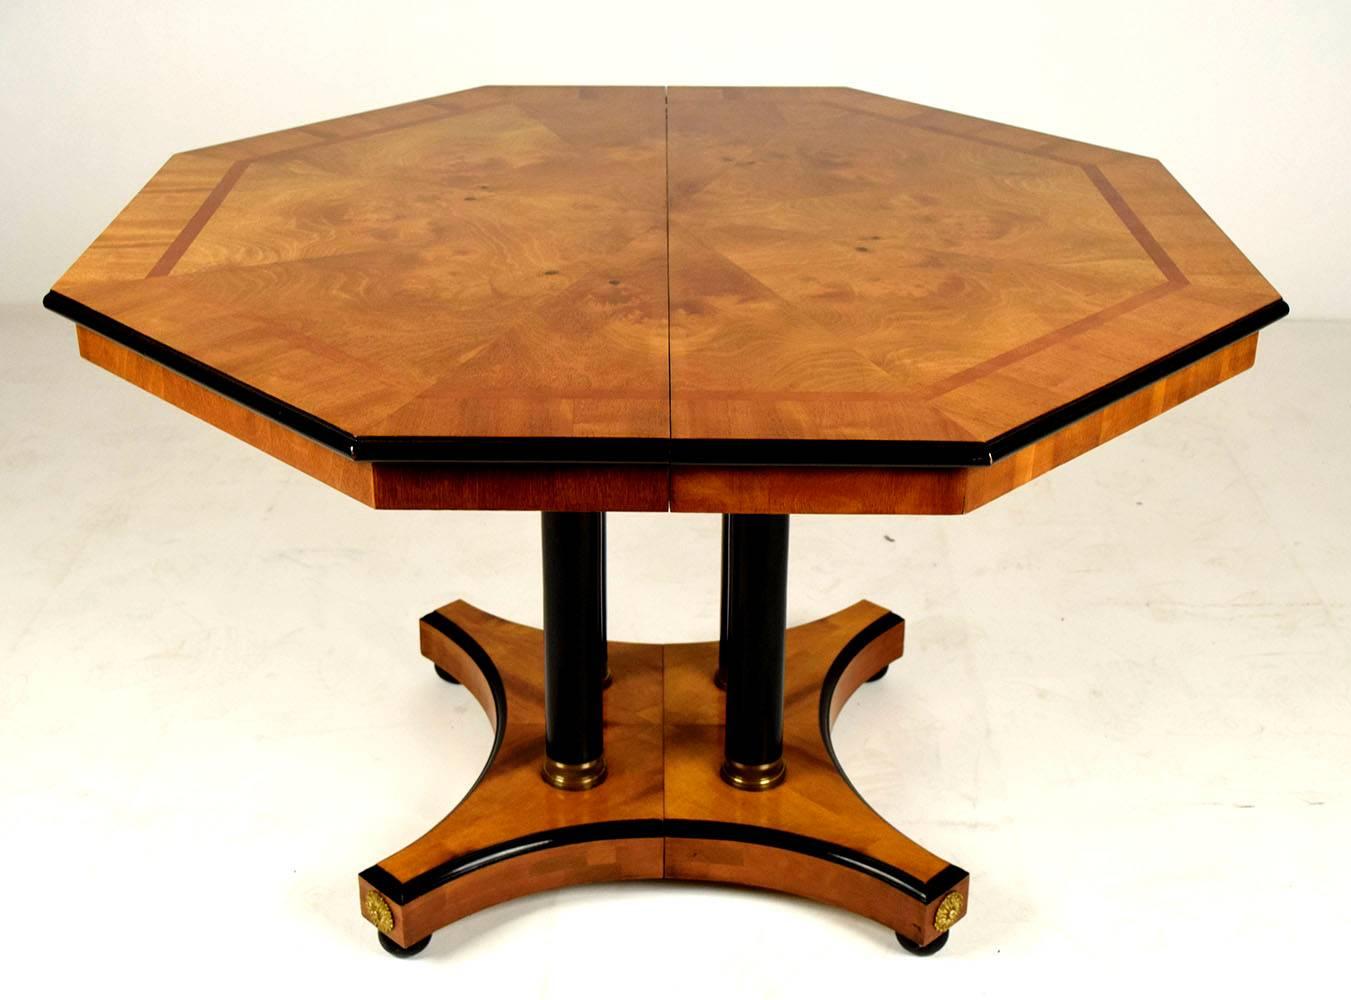 This beautiful octagonal shaped dining table is made of solid wood and covered in outstanding burl veneers with a golden yellow finish and black accent on the top sides. The elegant stretched legs have four black accent columns and brass rings at